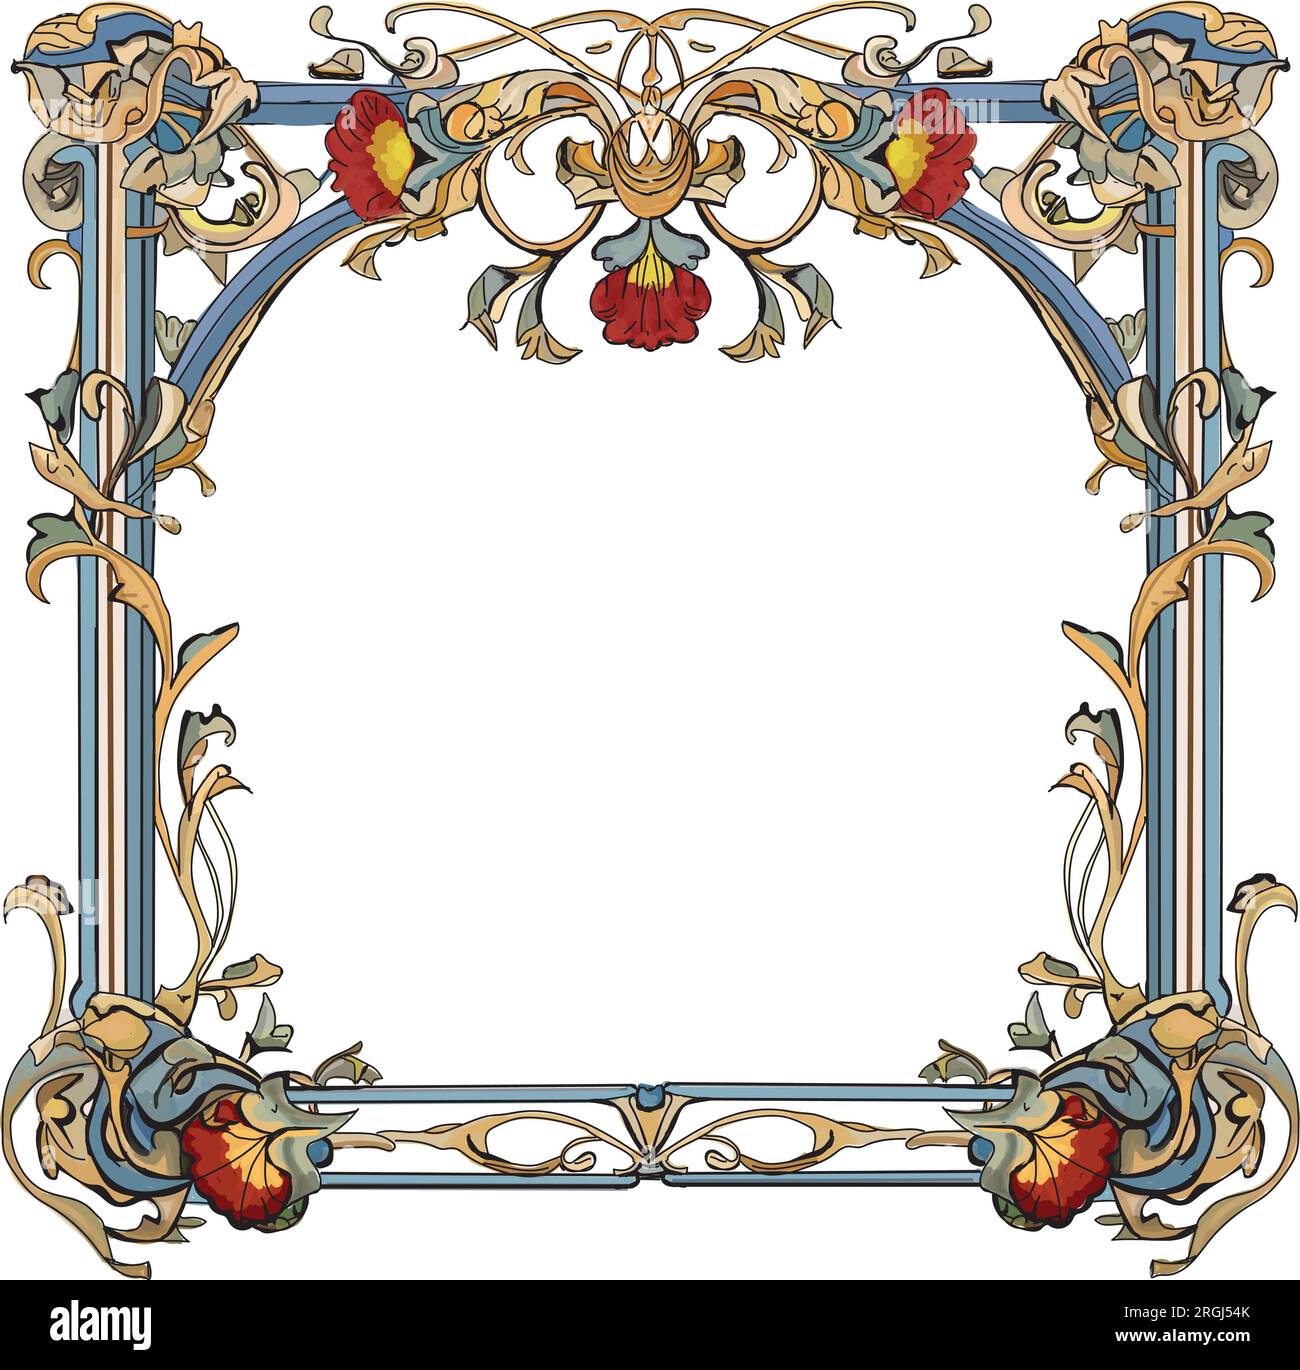 Ornate frame border with red and yellow hibiscus flower detail with leaves Stock Vector